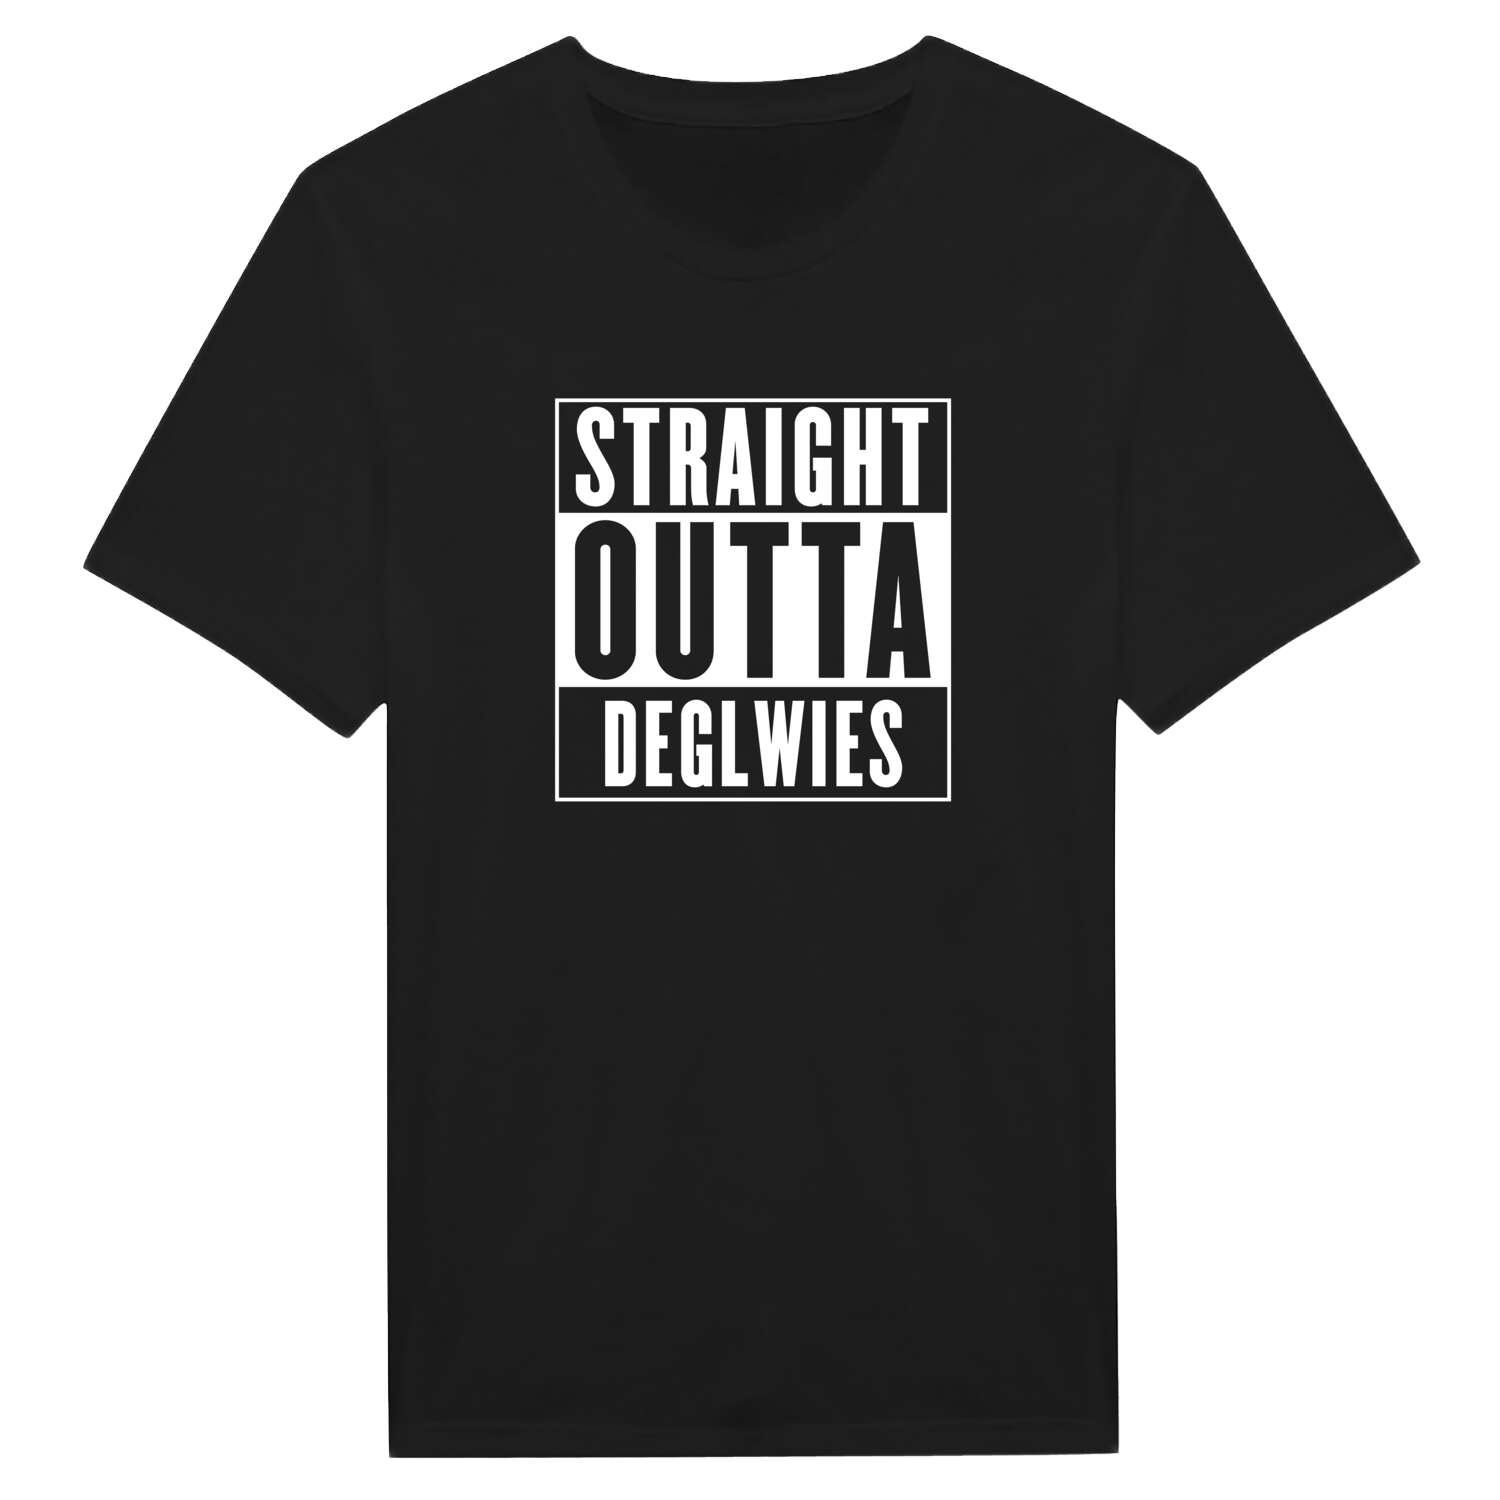 Deglwies T-Shirt »Straight Outta«